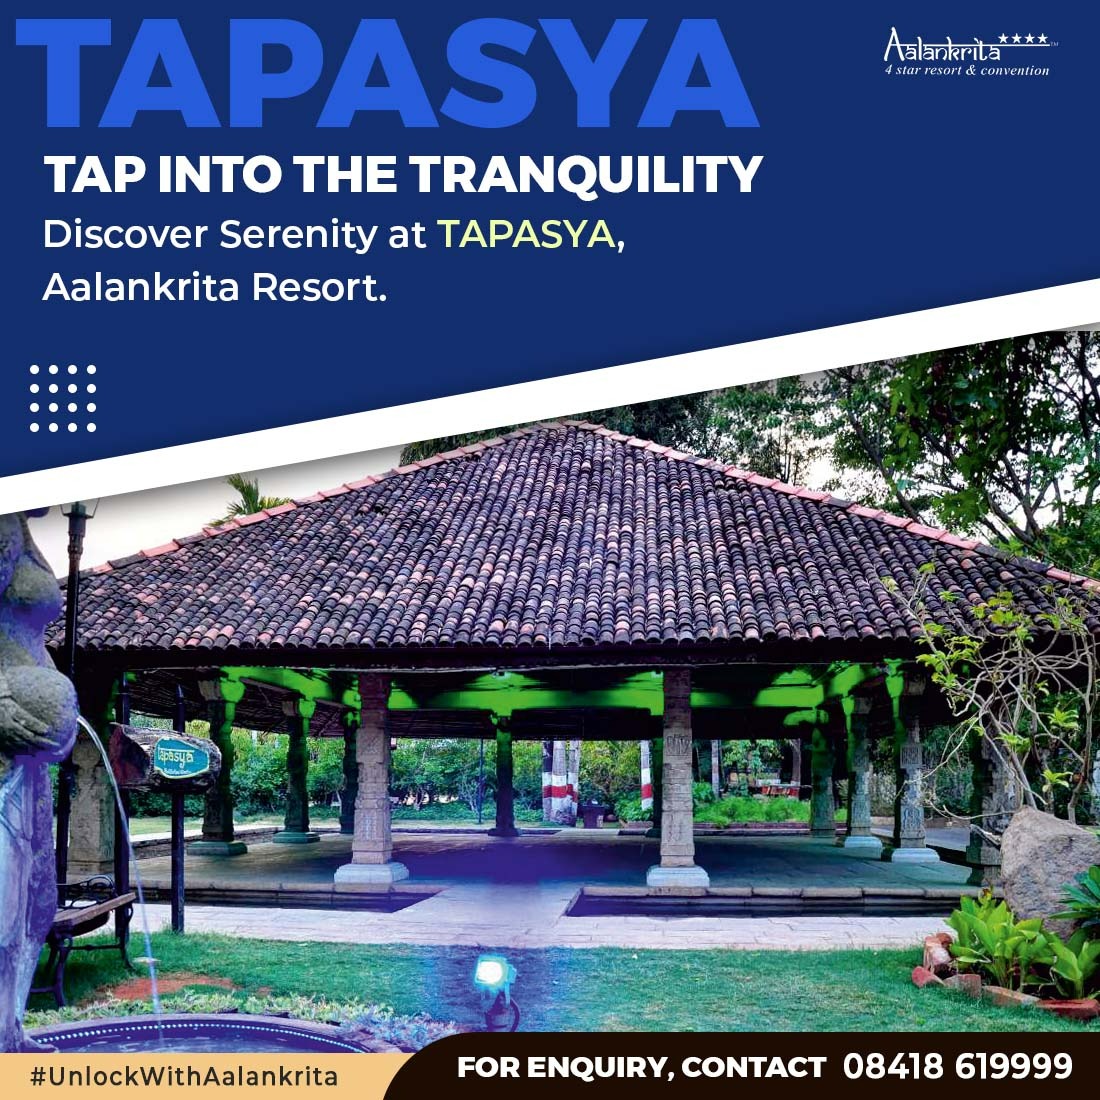 Embark on a journey of inner peace and rejuvenation amidst nature's embrace at our Tapasya Outdoor Venue! Book your retreat today & embrace the beauty of mindful living! #Celebrations #SereneRetreat #TapasyaRetreat #InnerPeace #WellnessJourney #Mindfulness #NatureEscape🍃🧘